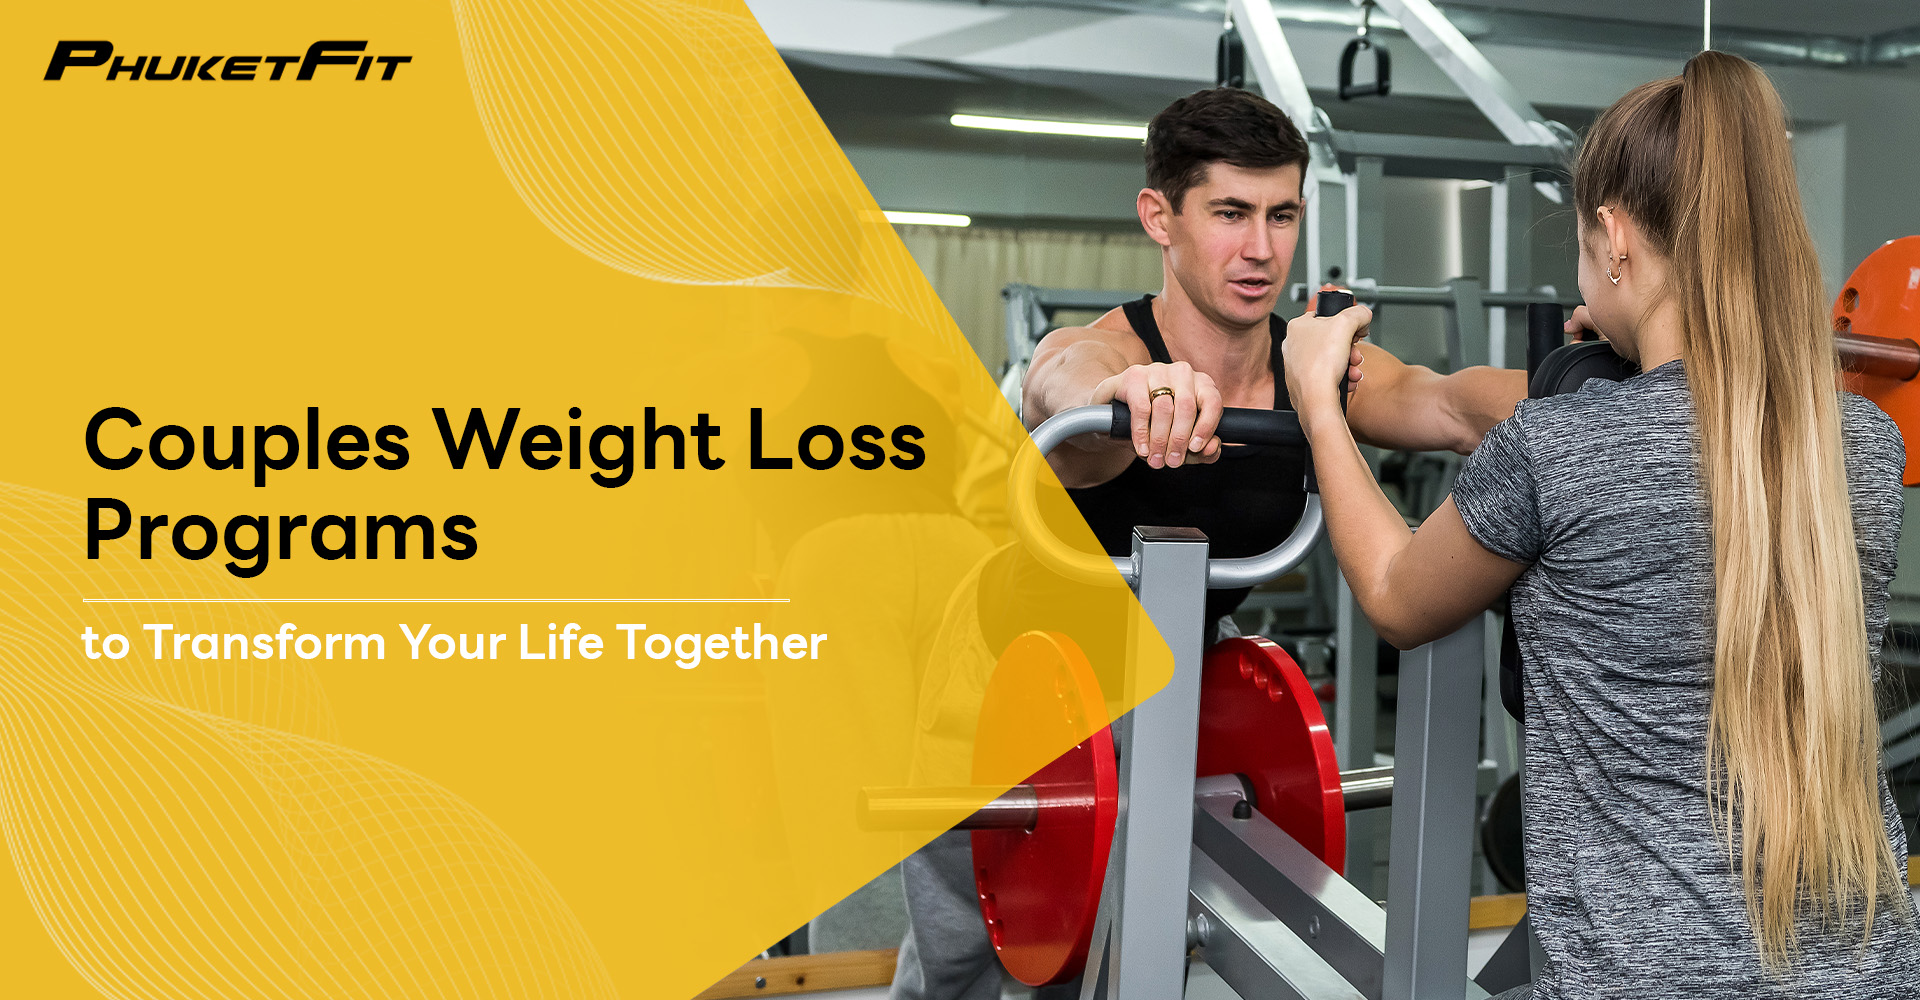 Couples Weight Loss Programs to Transform Your Life Together